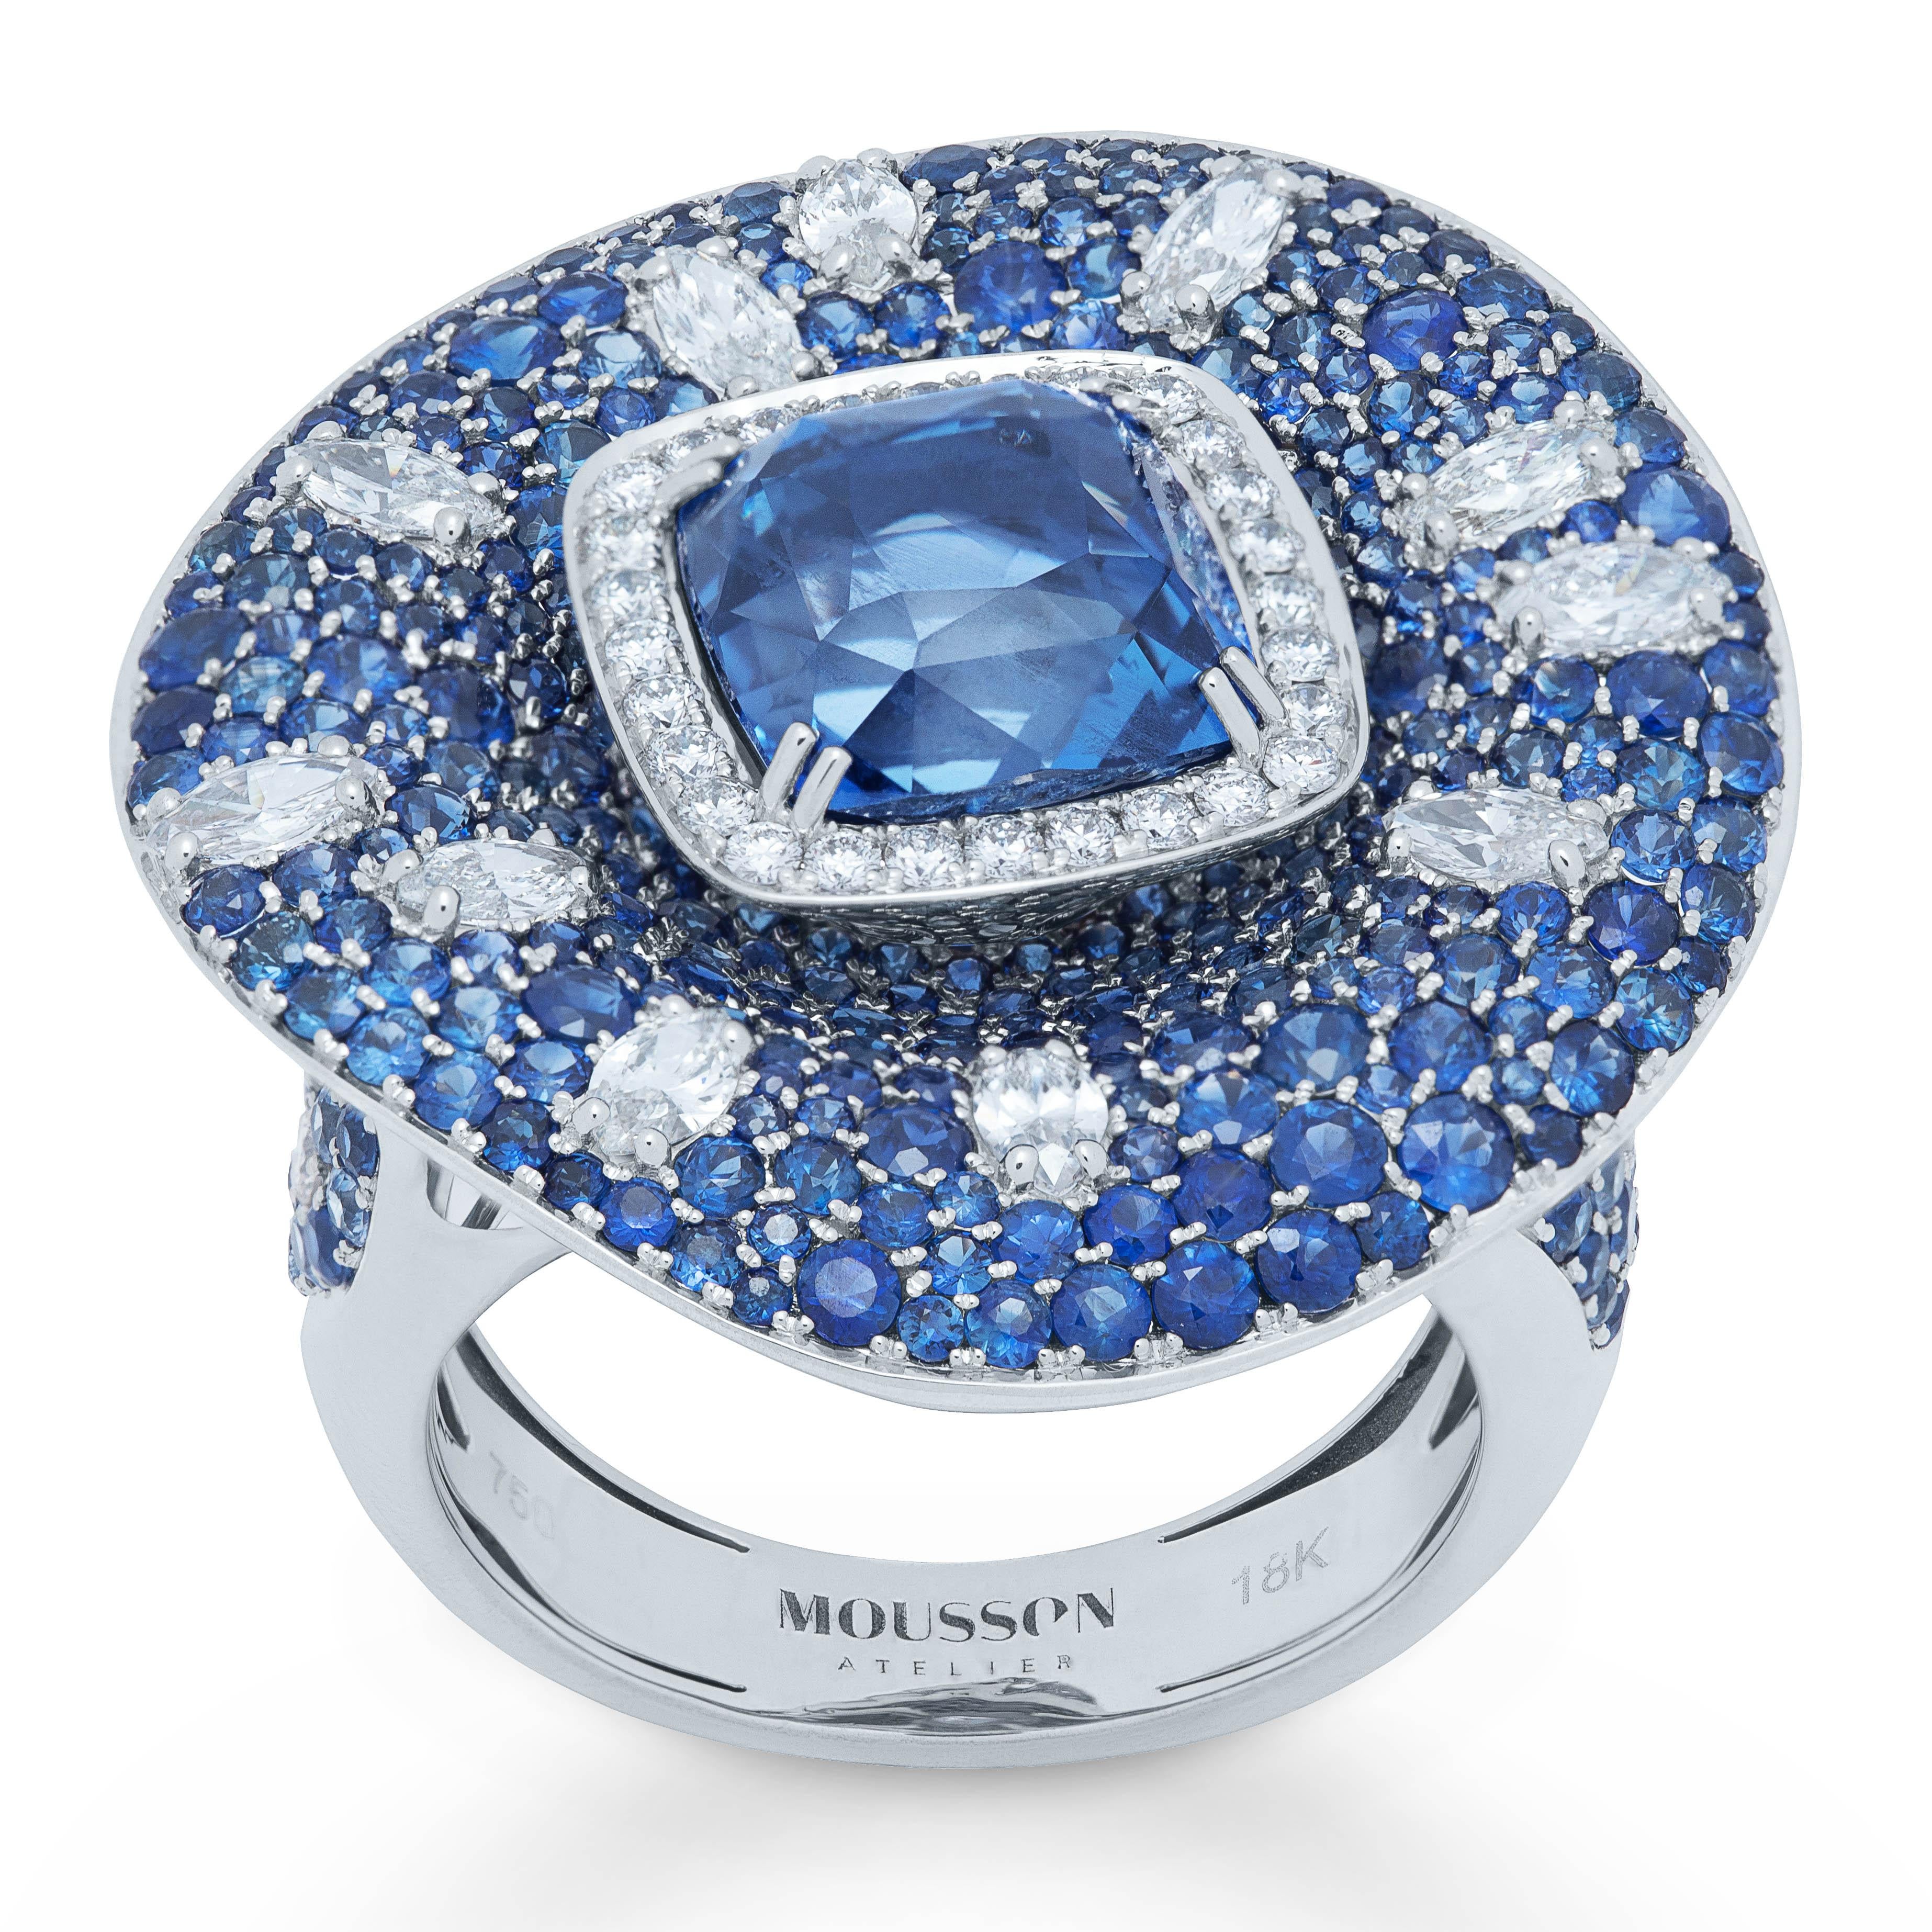 AIGS Certified 6.14 Carat Sapphire Diamonds 18 Karat White Gold Ring

Off the southeast coast of Africa rests Madagascar, the home to some of the world’s most striking Blue Sapphires. This gorgeous Ring features a sizeable 6.14 carat Madagascar Blue